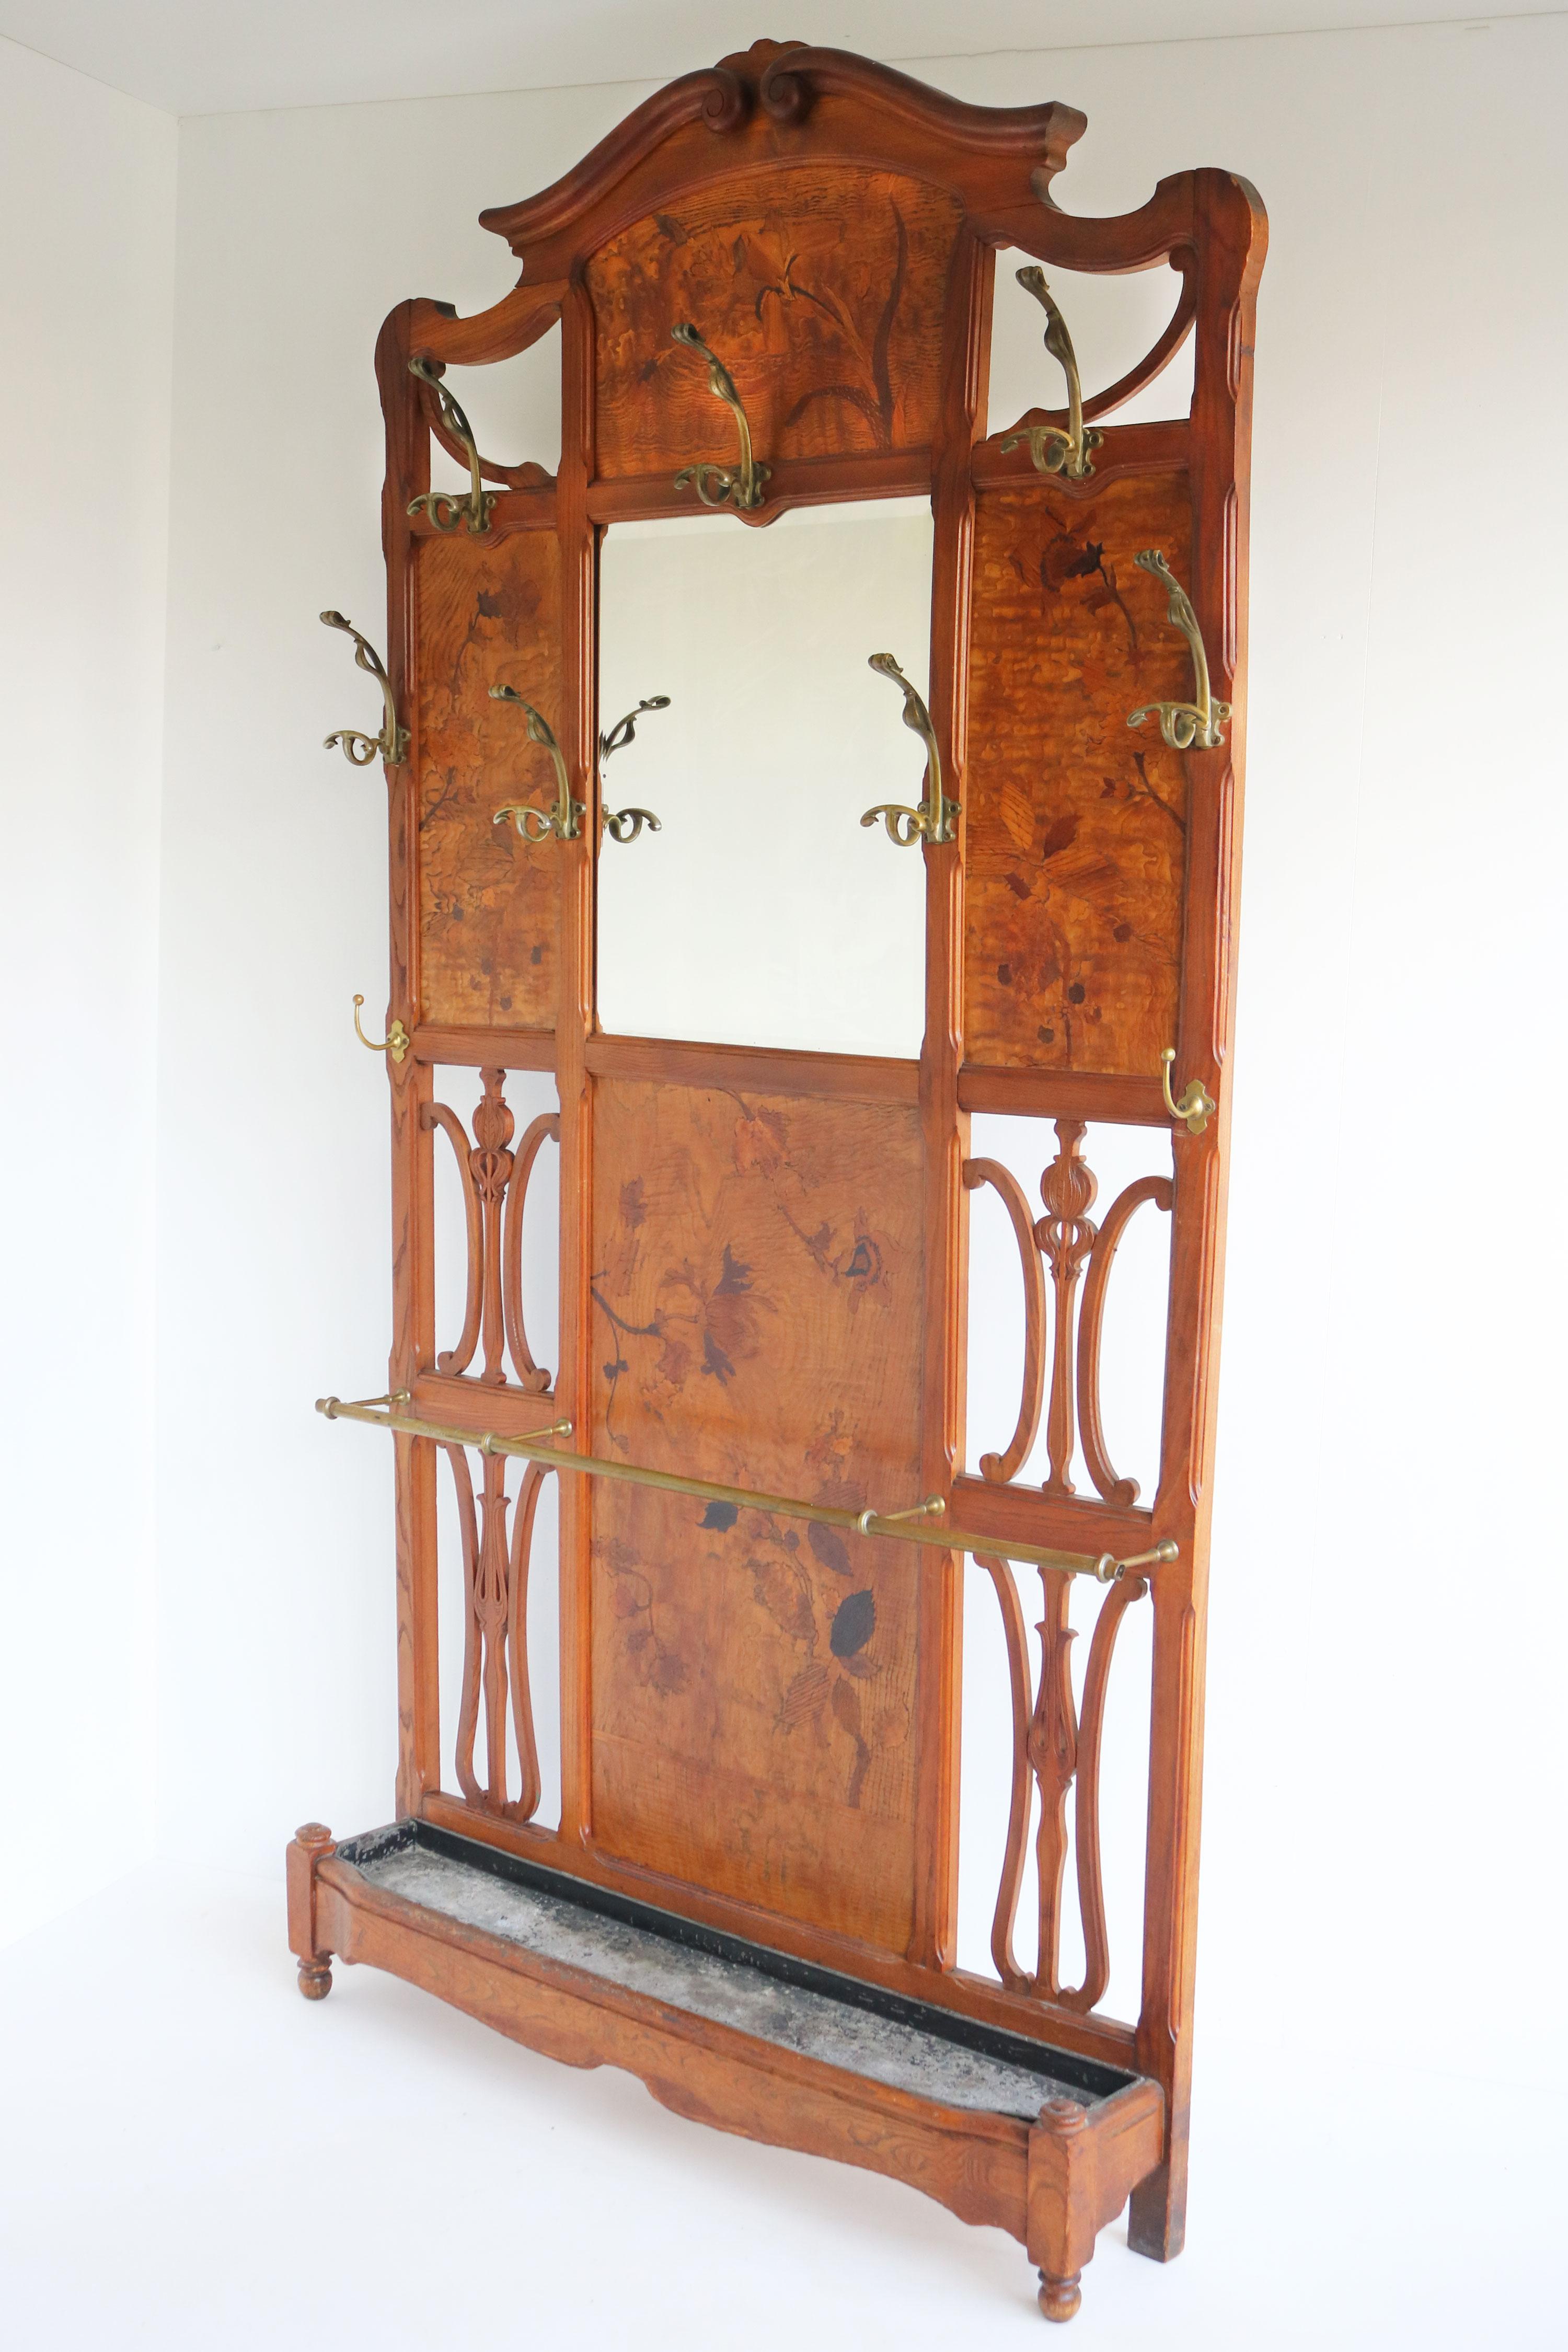 Enhance your hallway decor with the elegant and functional Emile Gallé hallway tree coat rack. 
Featuring exquisite craftsmanship and a timeless design. the coat rack comes with its original 9 art nouveau bronze hooks, that are just simply